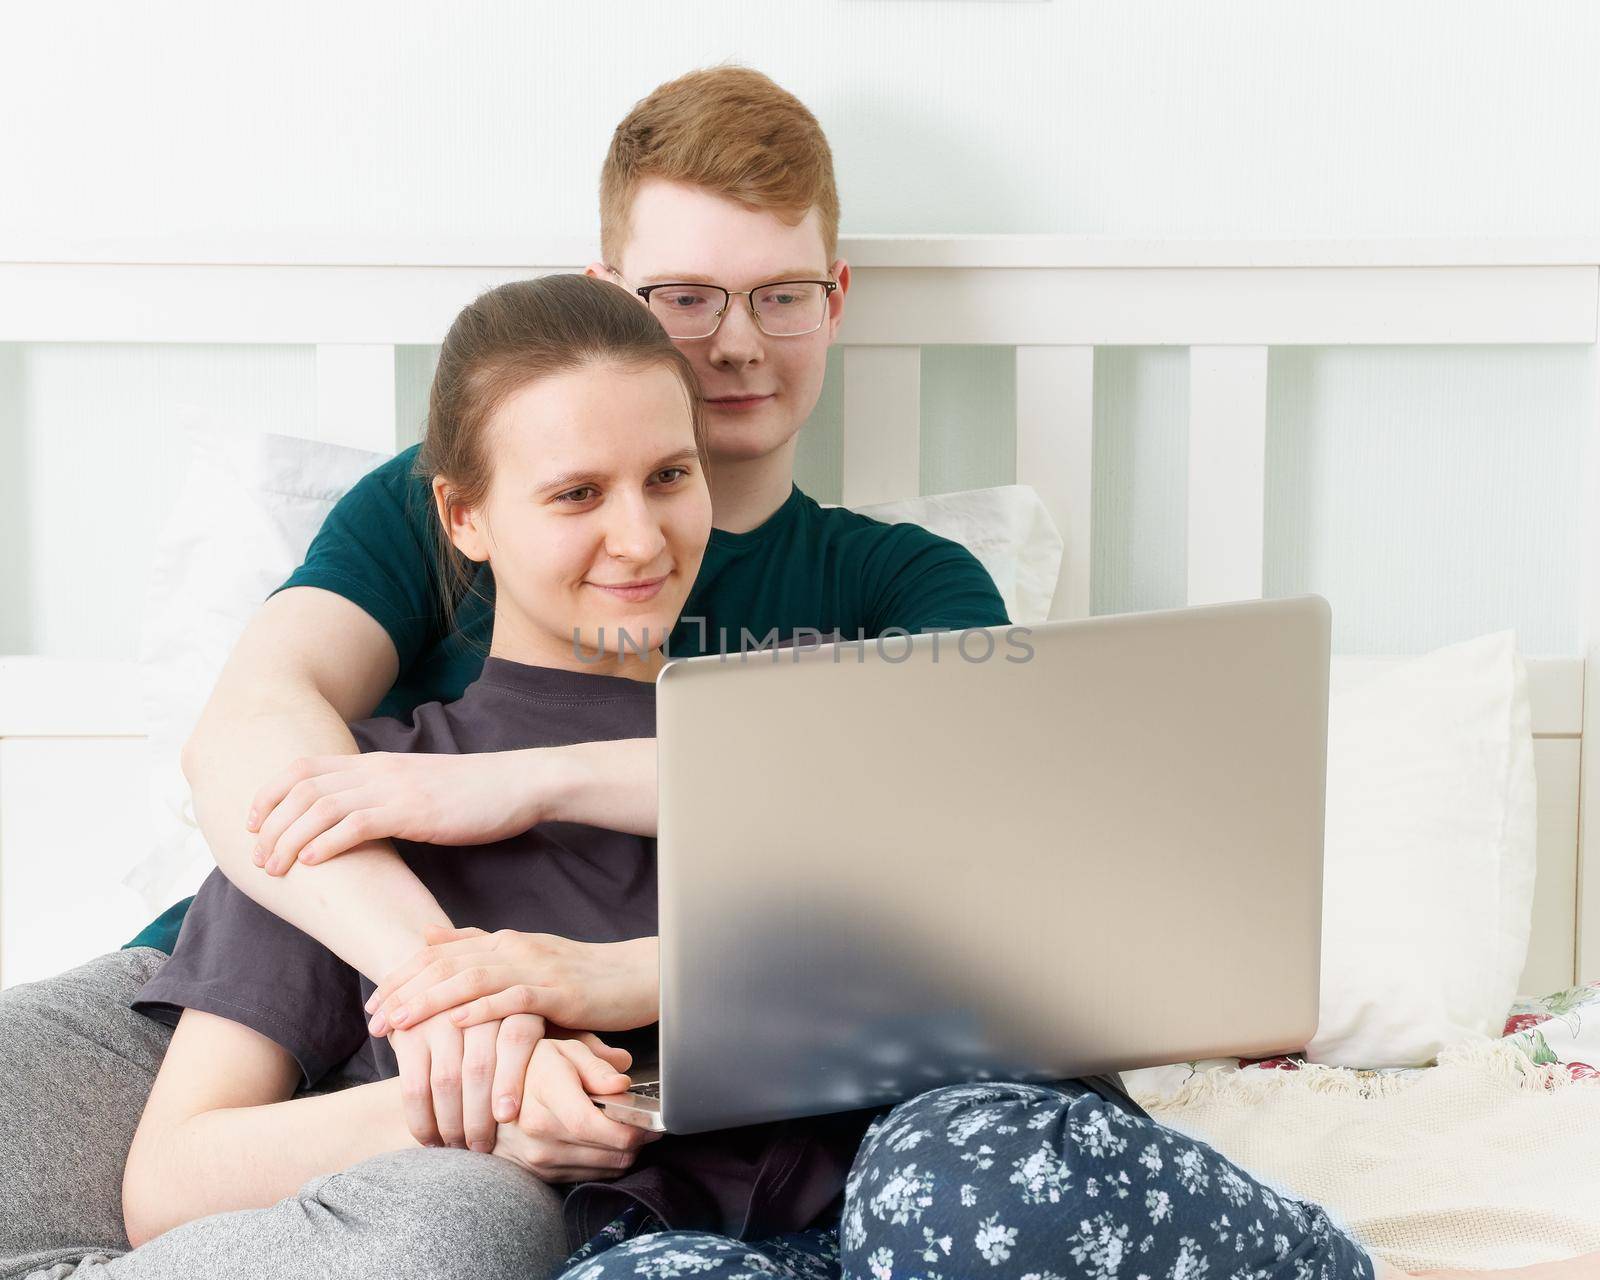 Teen in love lying on bed, watch movies on laptop during quarantine due to coronavirus pandemic. Boy and girl relaxing while staying at home. Concept of self-isolation, sociophobia